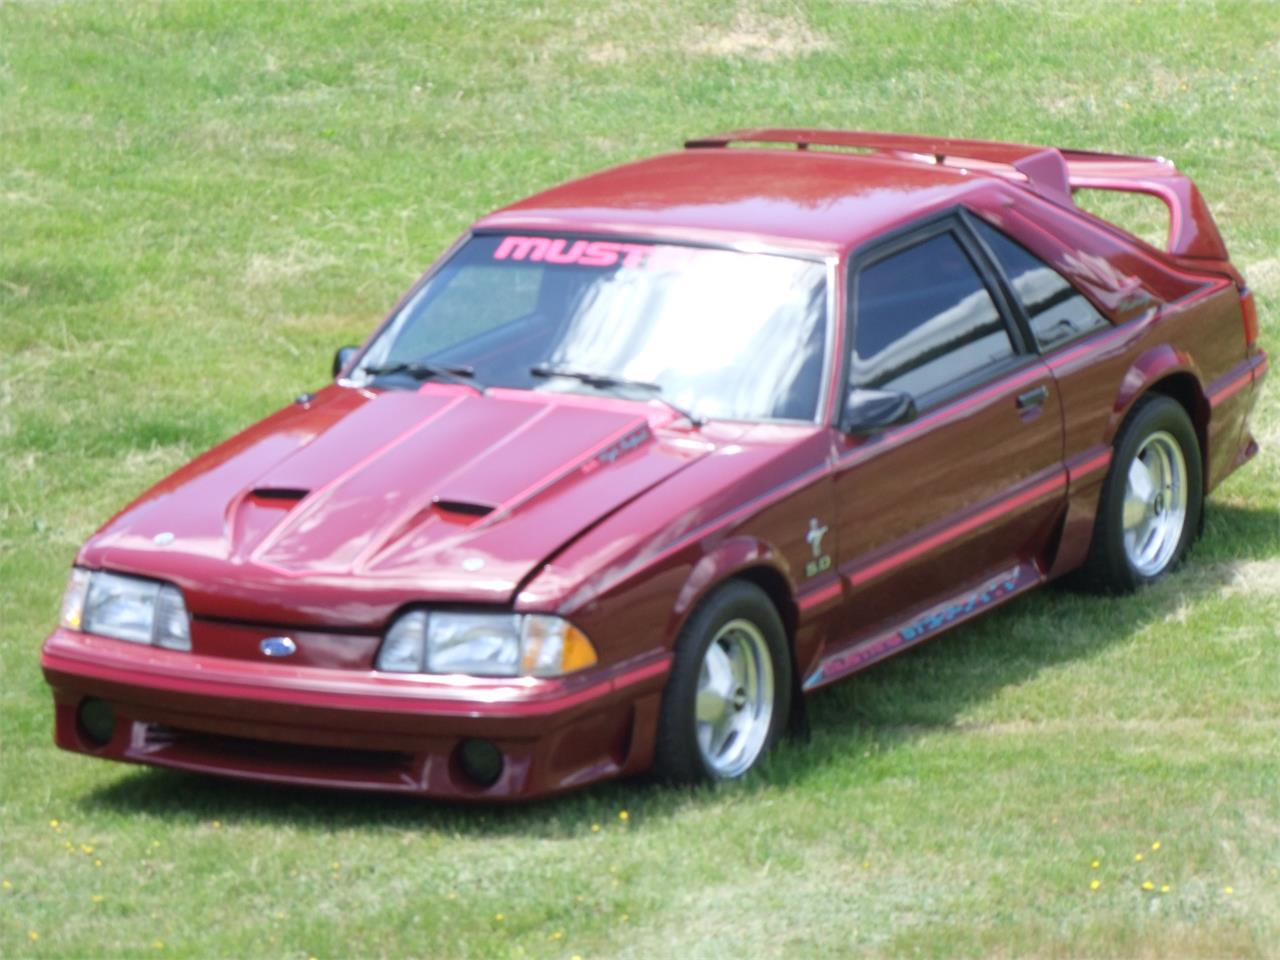 1989 Ford Mustang GT for Sale | ClassicCars.com | CC-1214353